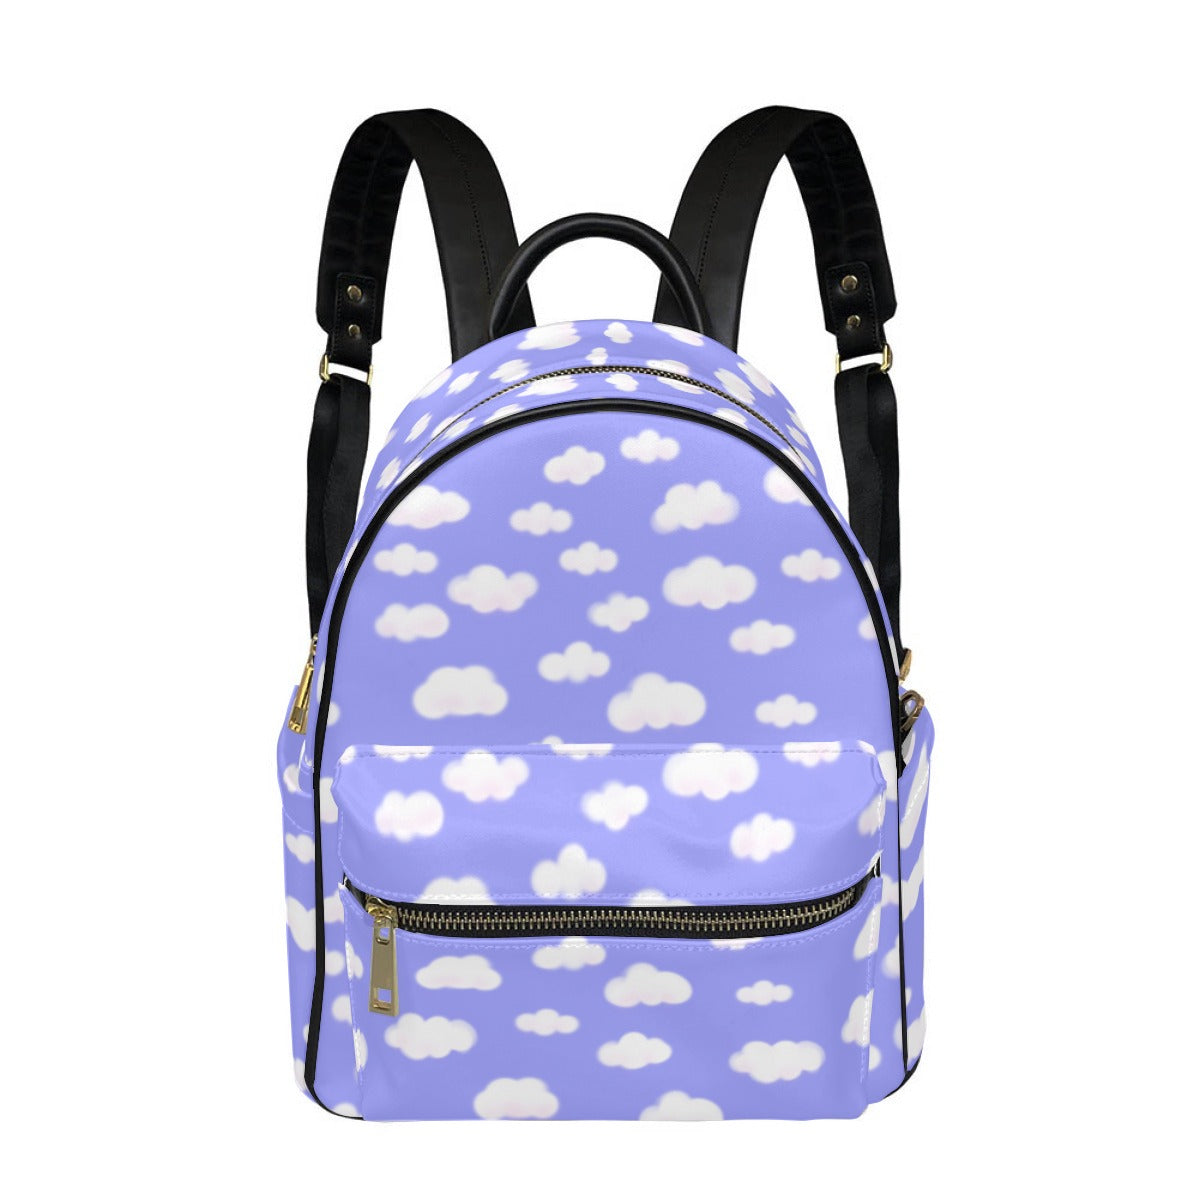 Dreamy Clouds Mini Backpack (Periwinkle)